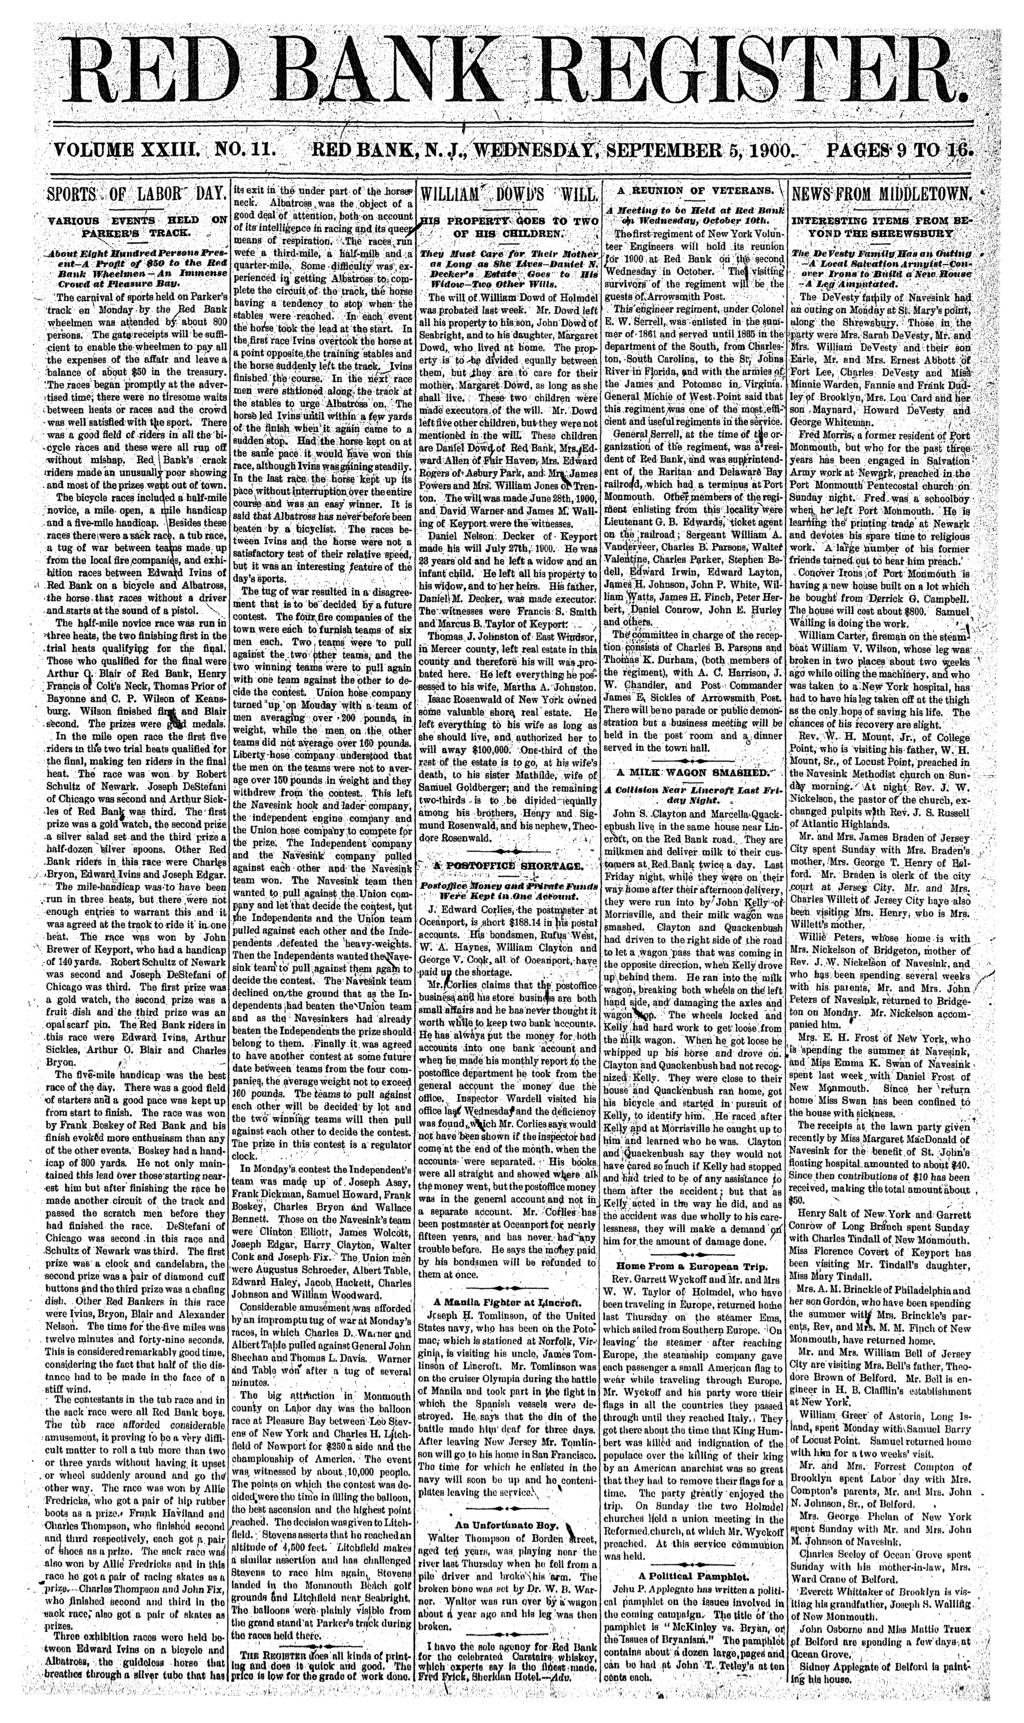 MNK \. TJM VOLUME XXH. NO. 11. RED BANK, N. J., WEDNESDA, SEPTEMBER 5,1900. PAGES* 9 TO 1 SPORTS. OF_LAB0R DA. VAROUS EVENTS HELD ON PARKERS TRACK..,.Abou Egh Hundred Persona JPresen-A Prof of $SO o he Bed Bank Wheelmen - An mmense Crowd a Pleasure Bay.